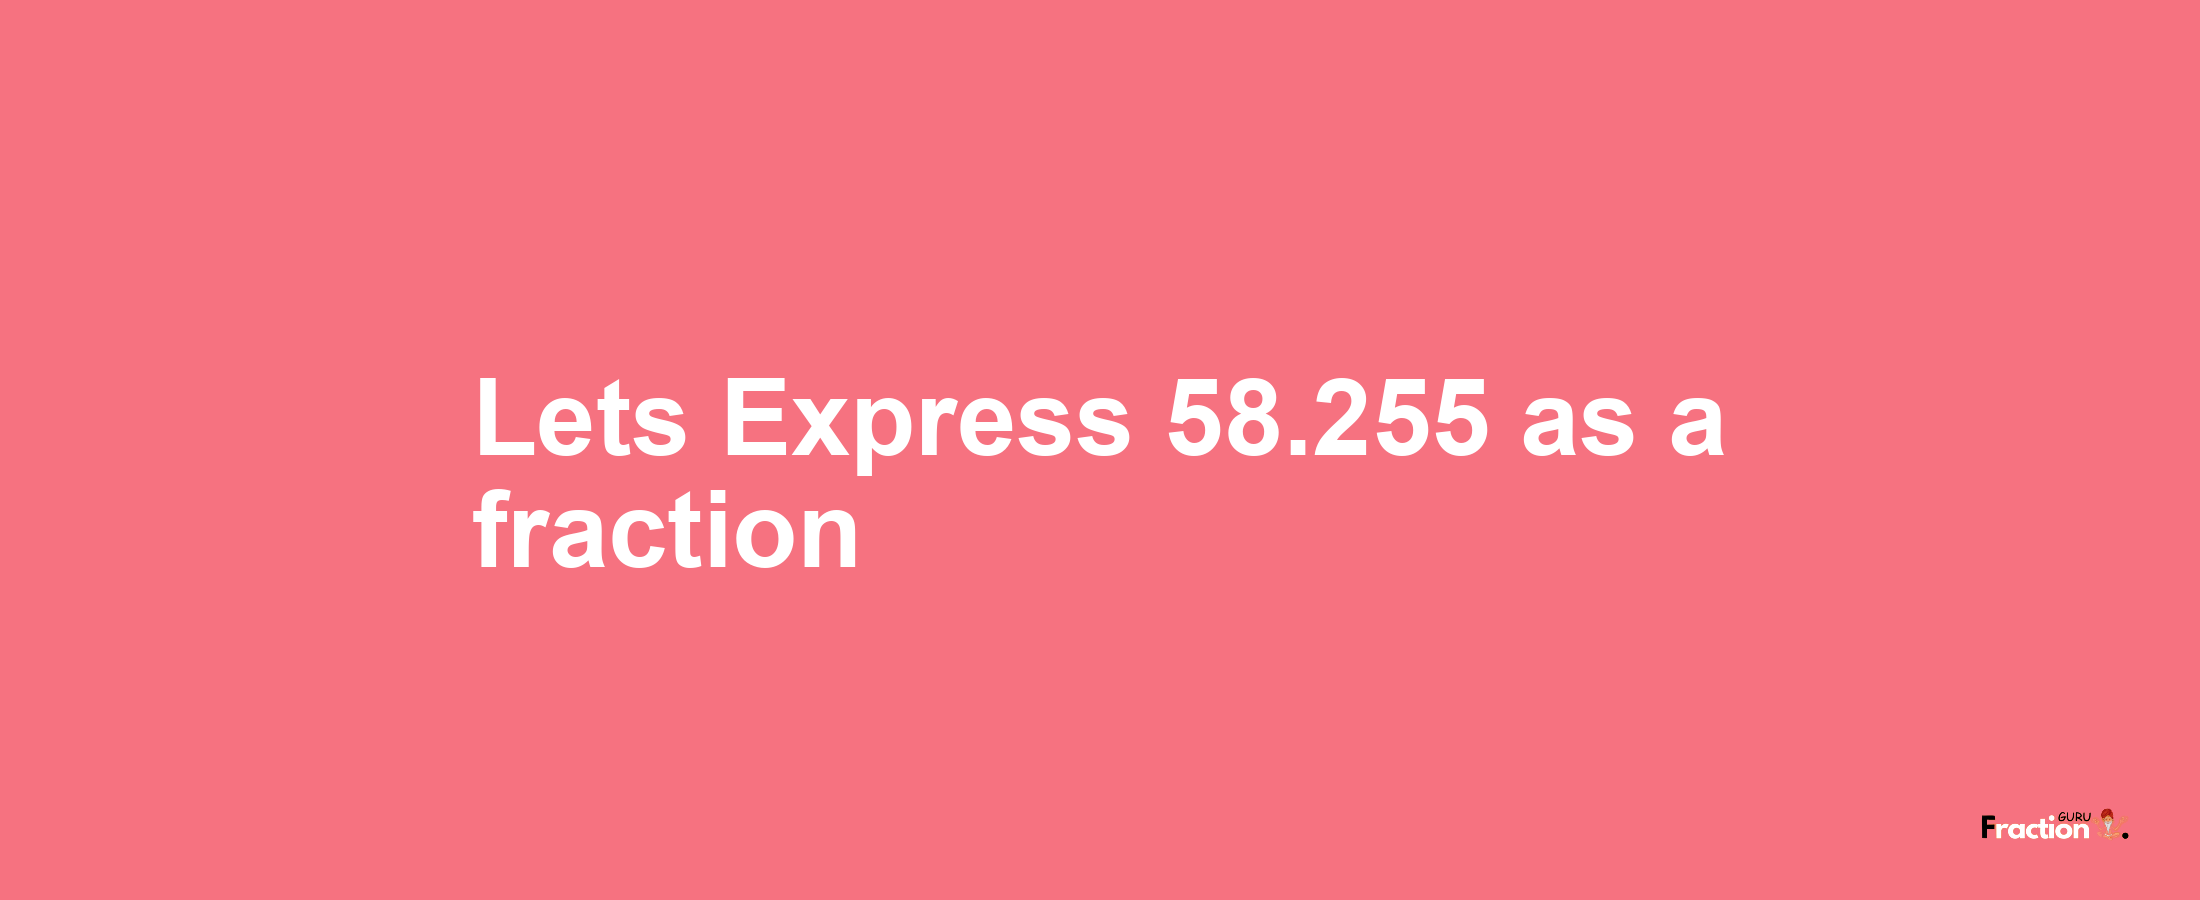 Lets Express 58.255 as afraction